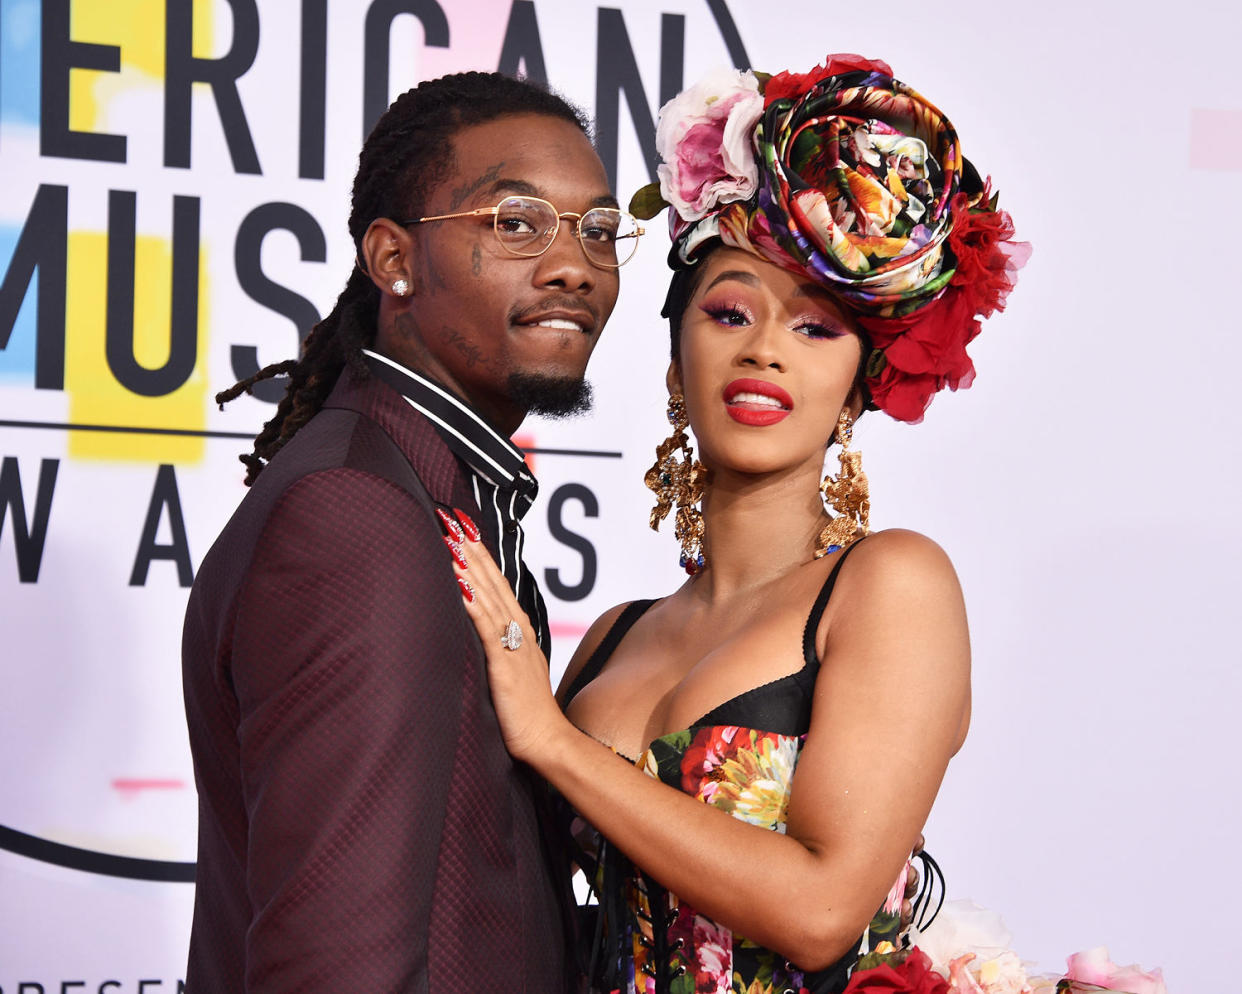 Offset and Cardi B attend the 2018 American Music Awards at Microsoft Theater on October 9, 2018 in Los Angeles, California.  (Patrick McMullan via Getty Images)